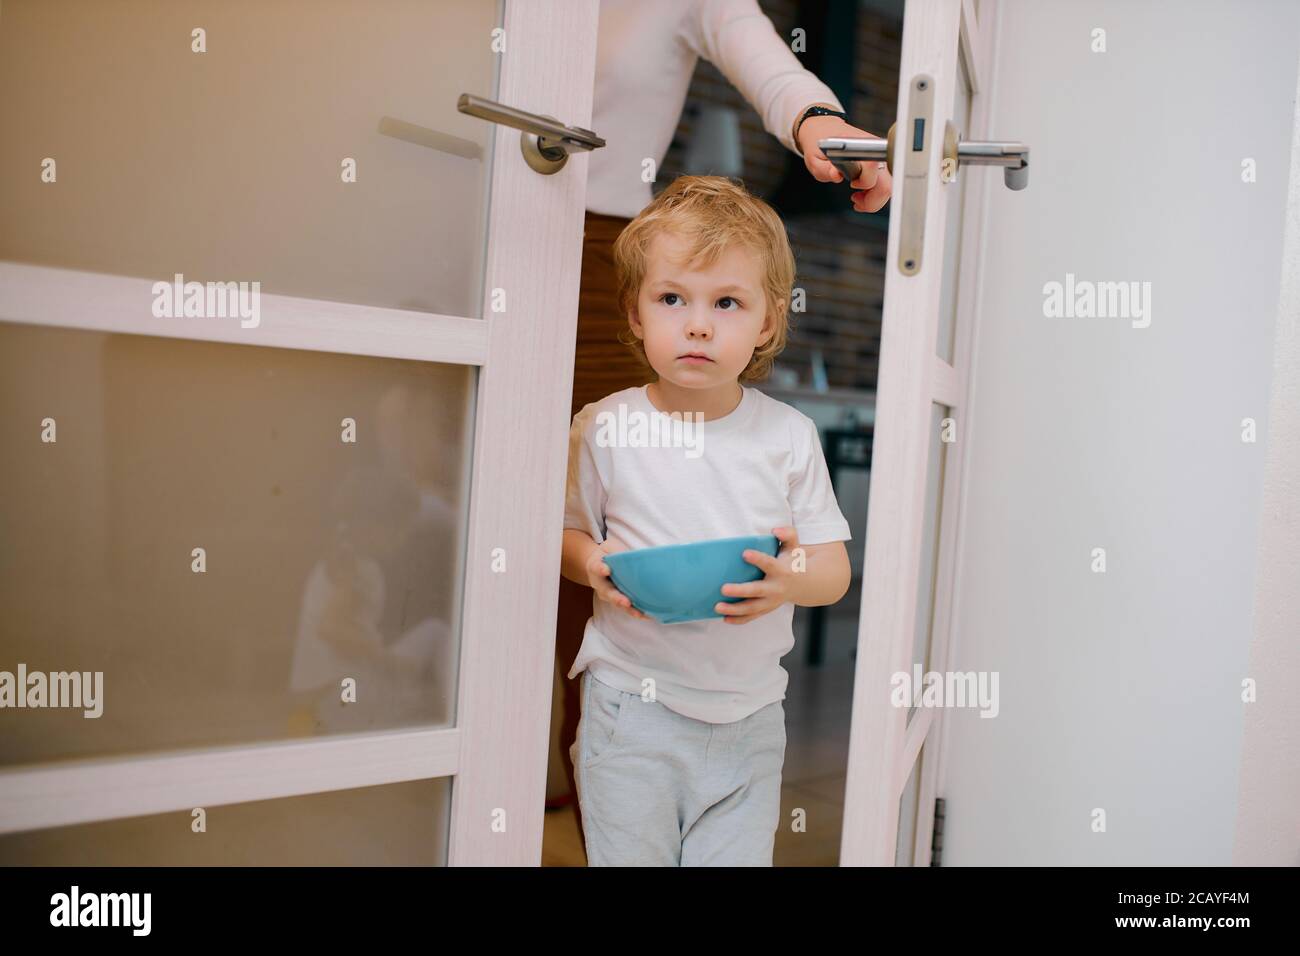 little caucasian boy, child stay near the door at home holding blue dish in hands, sweet child Stock Photo